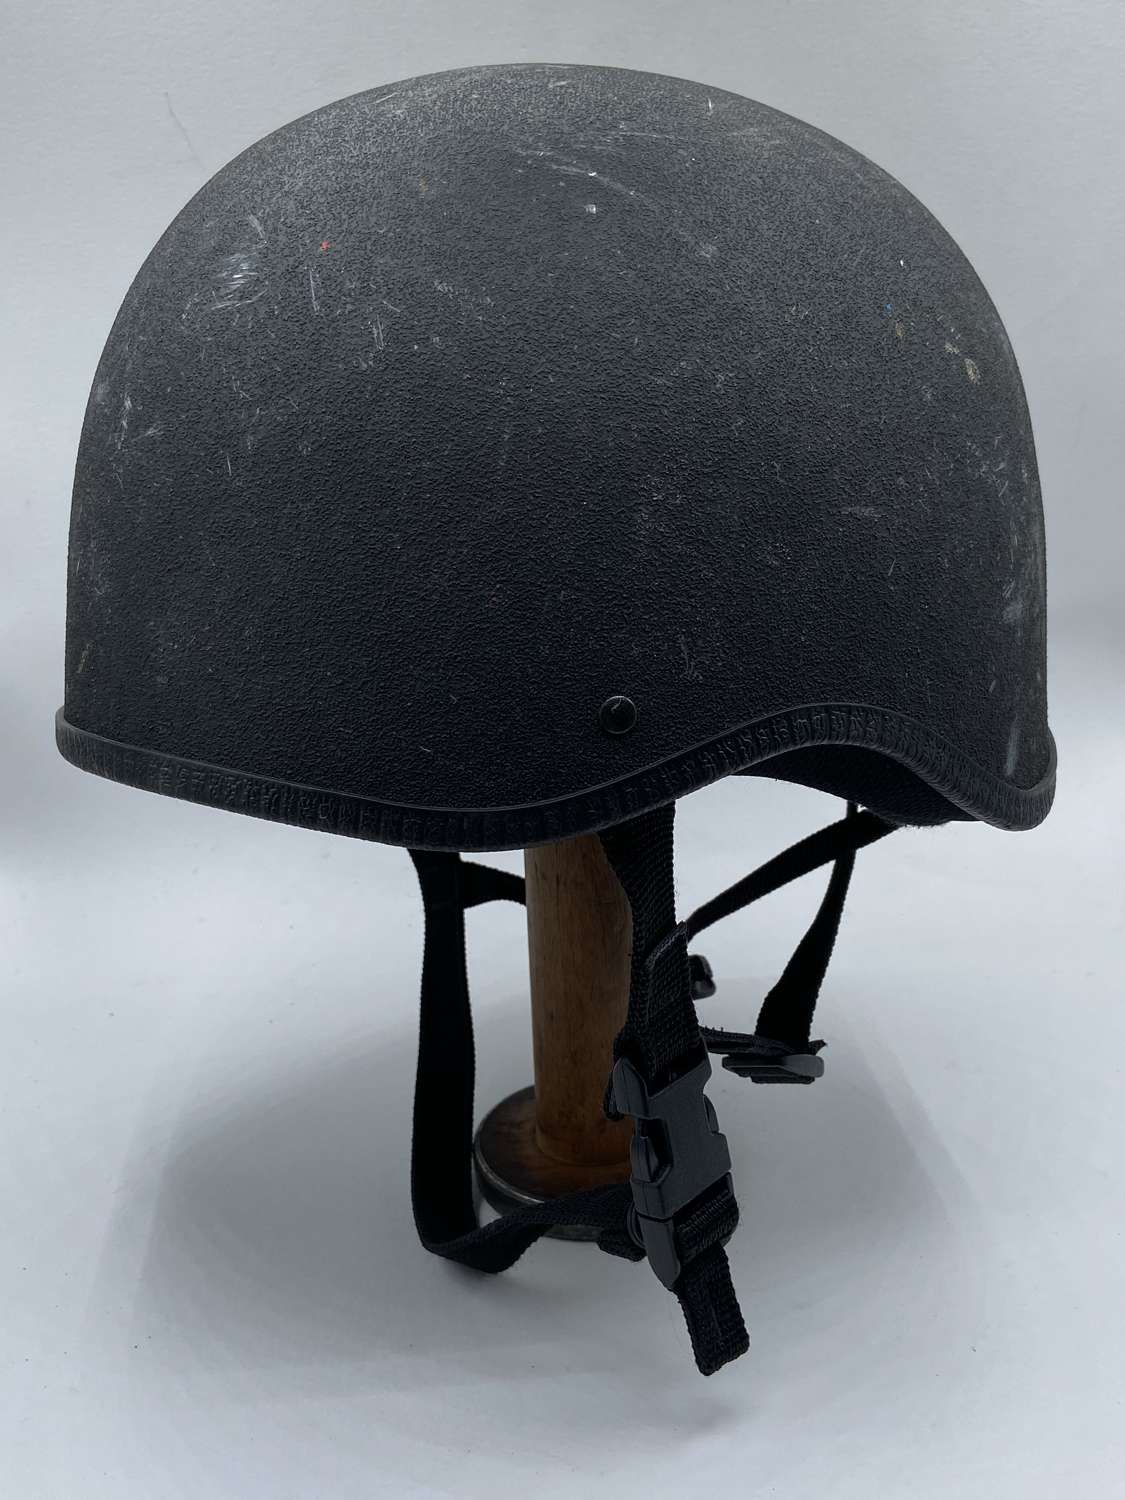 Horse Riding Safety Equestrian Helmet By Charles Owen & Co